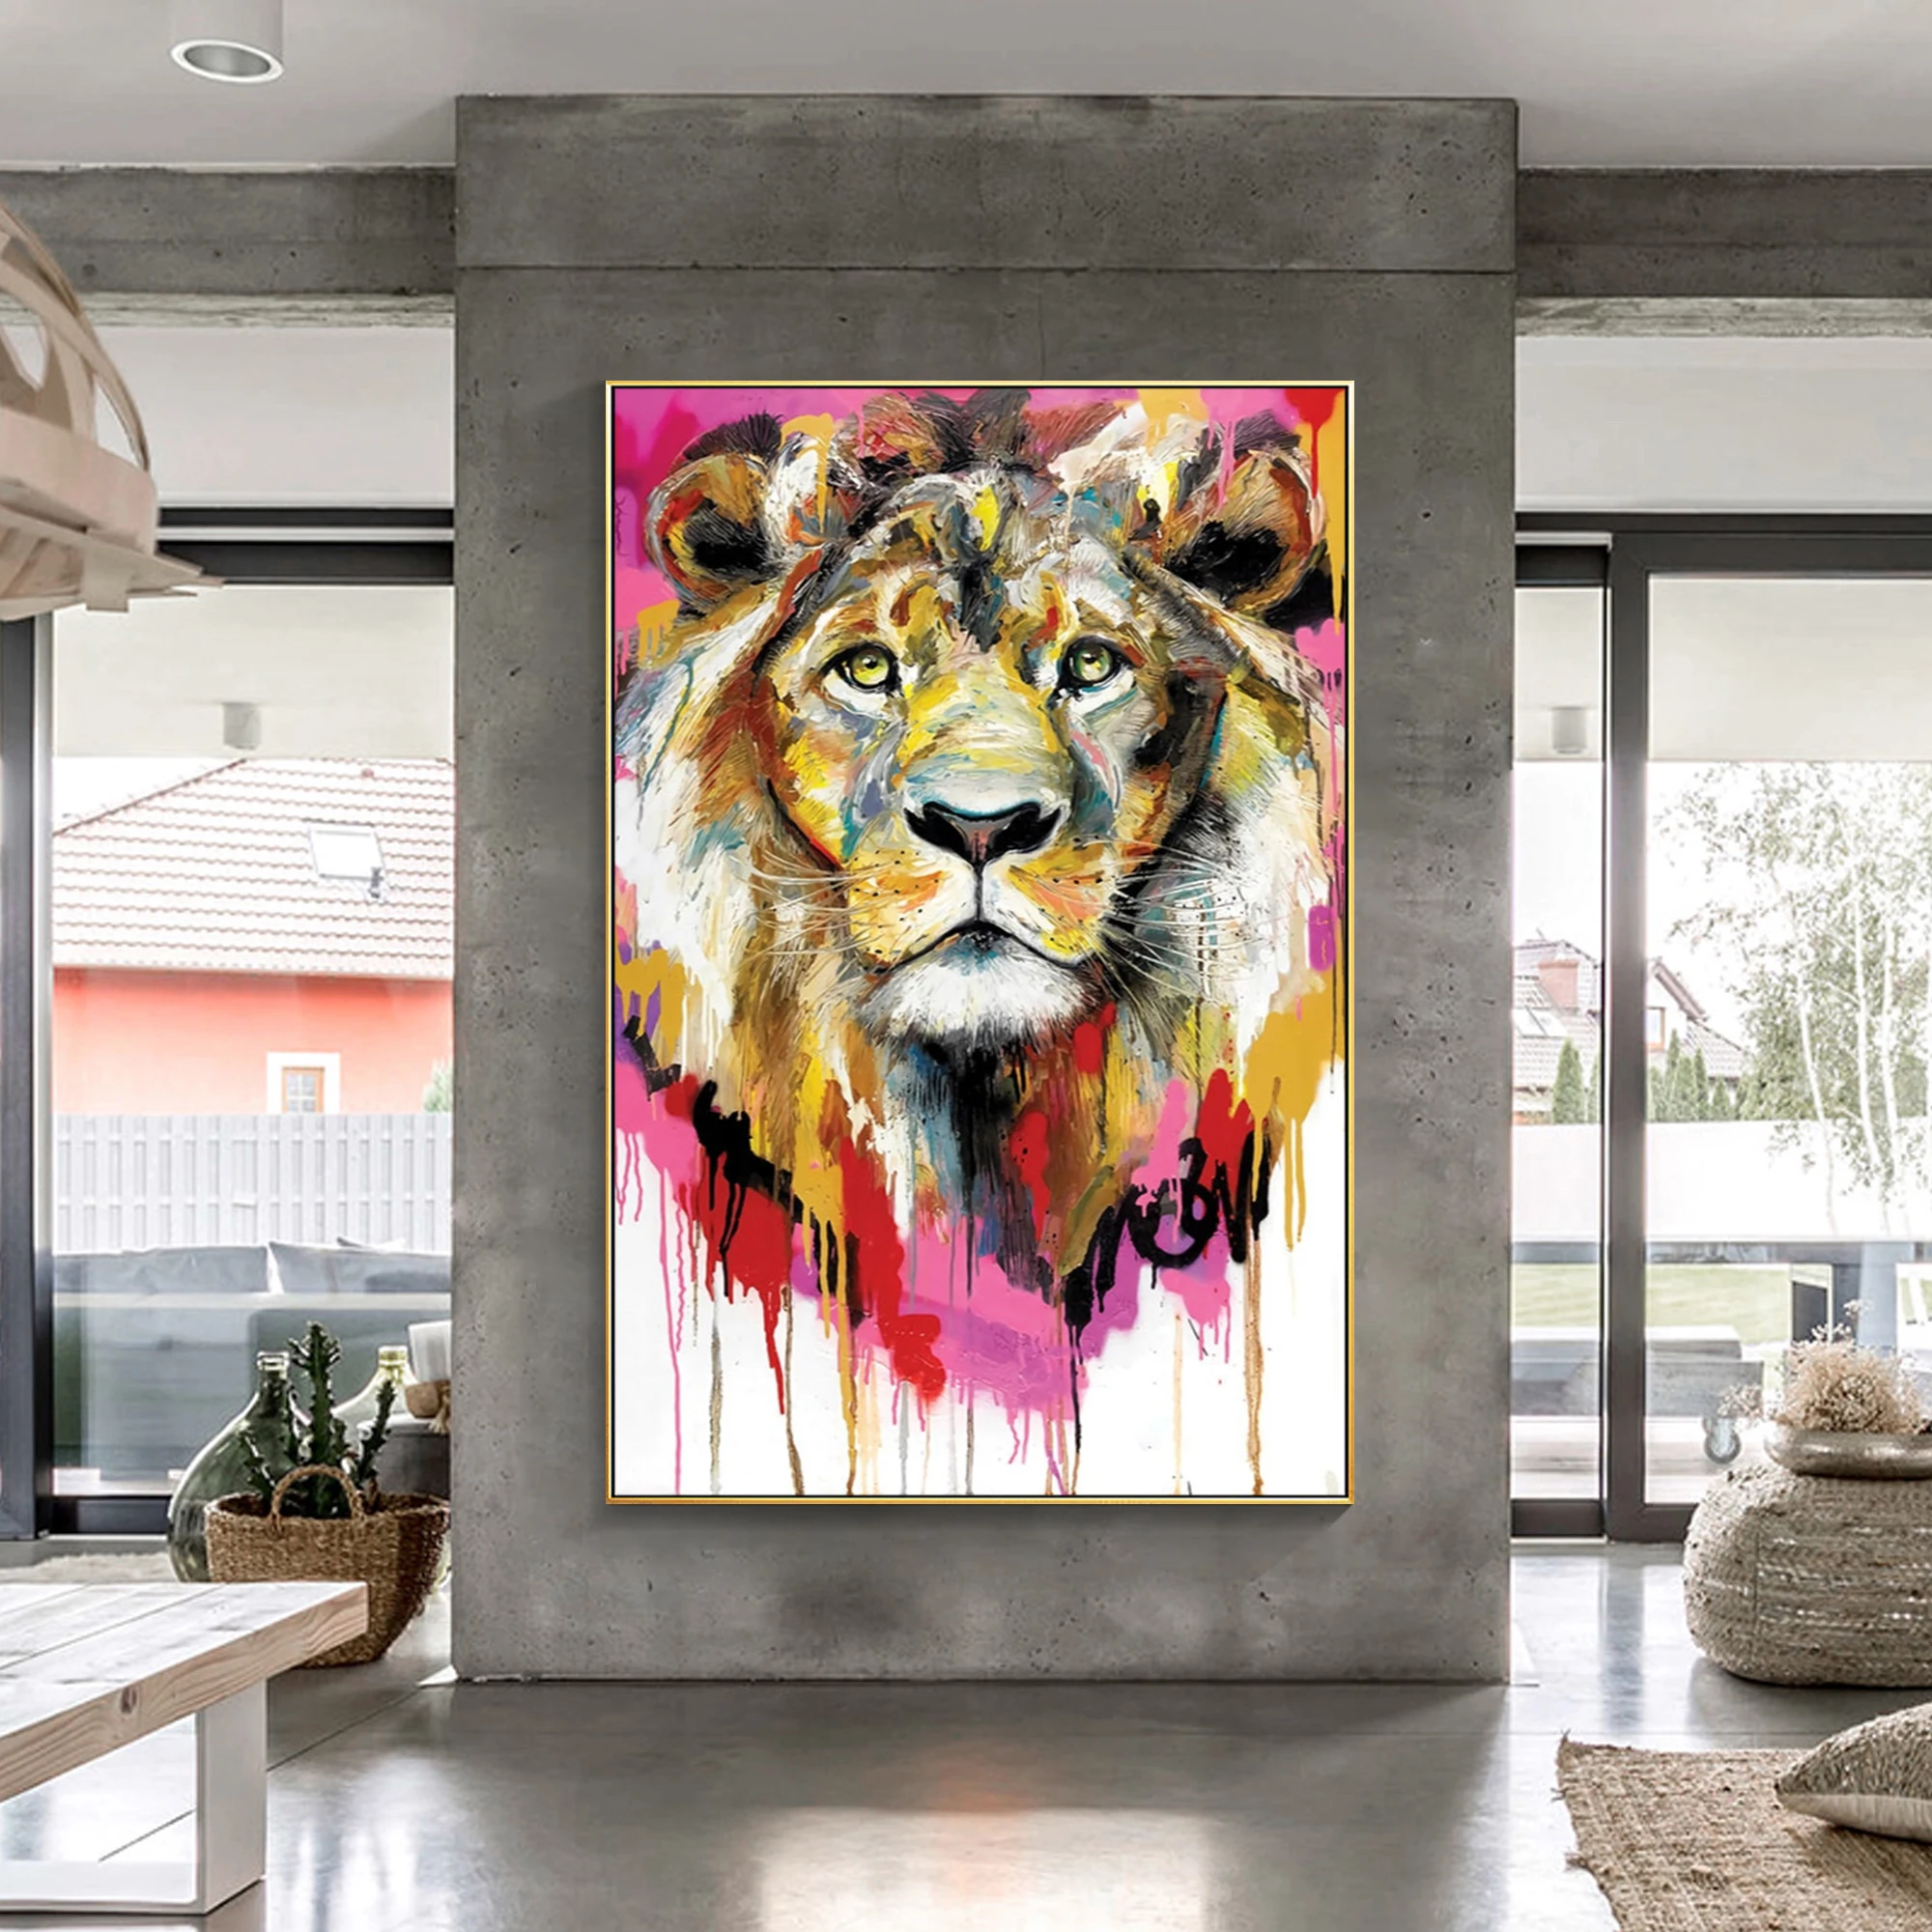 Colorful Lion Animal Acrylic Painting On Canvas Large Wall Art Modern Wall  Art Contemporary Home Wall Art Living Room Decor - Painting & Calligraphy -  AliExpress